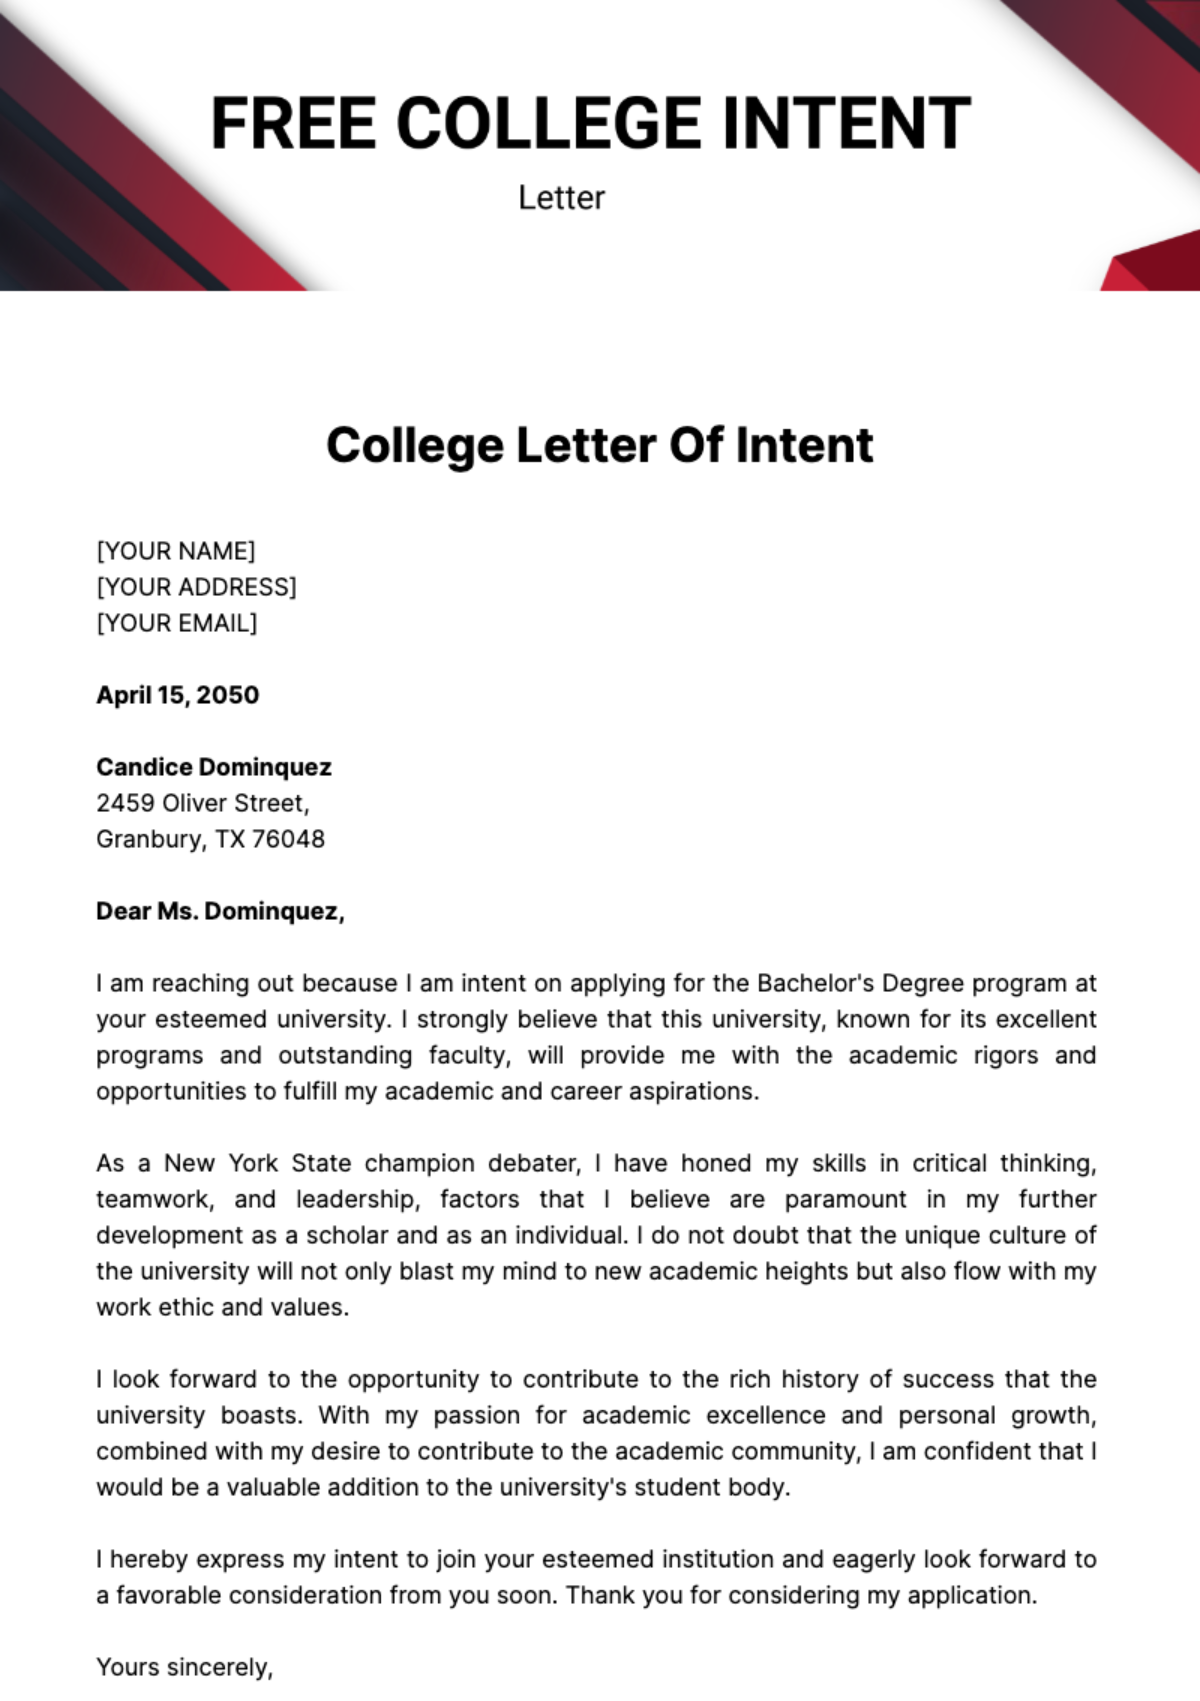 Free College Letter of Intent template